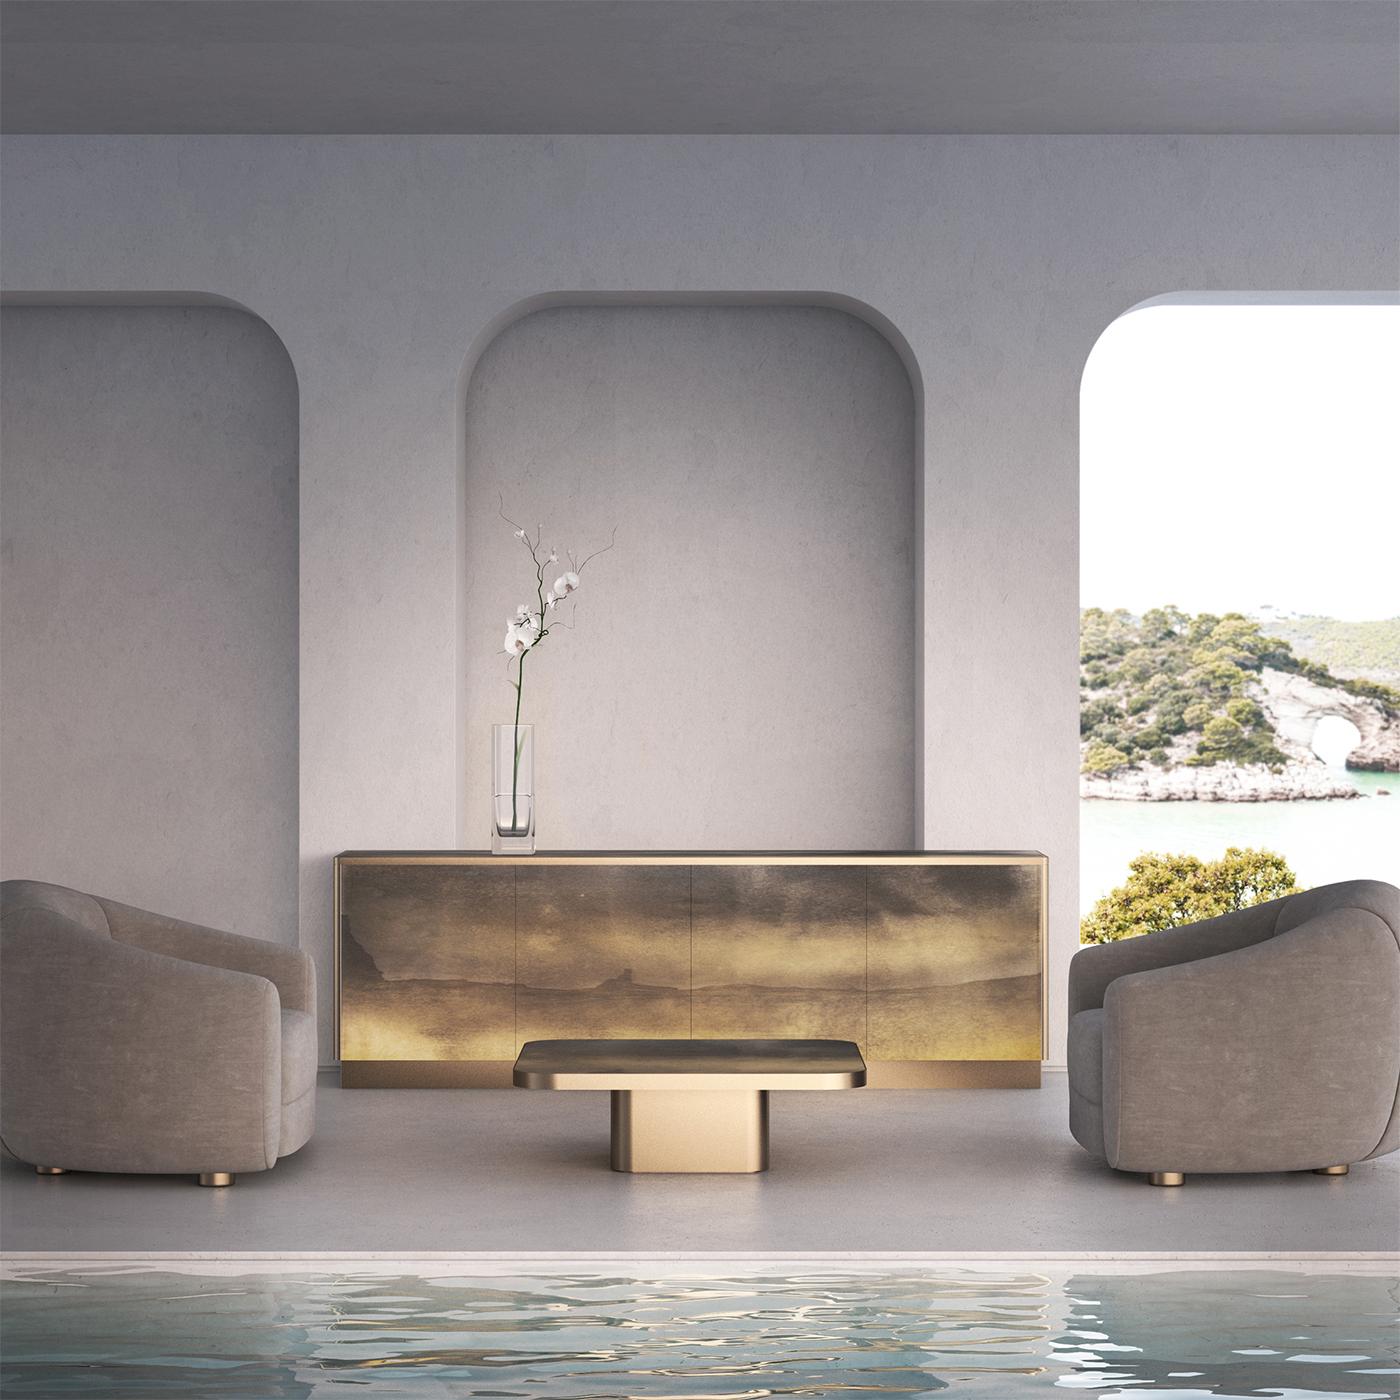 Sideboard in Gargano finish coating on etched glass. Baseboard and external edges in wood varnished with burnished brass finish, inside finish in brushed oak. Internal adjustable shelves in clear glass with polished edge.